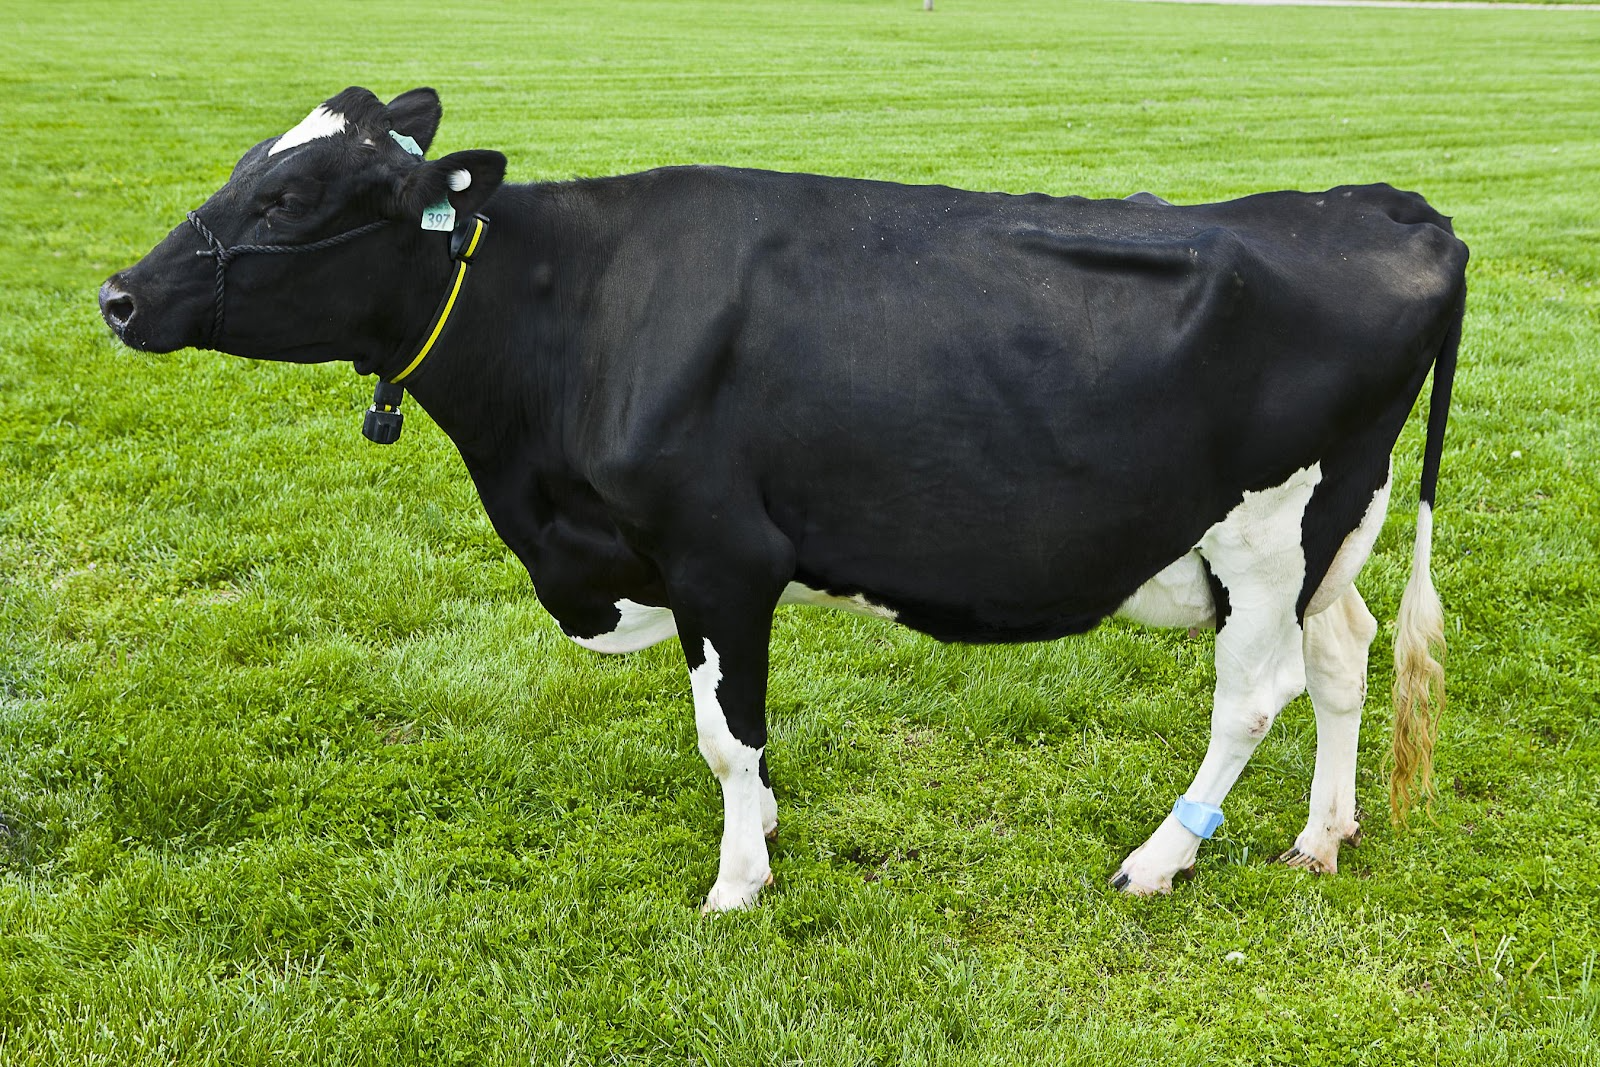 Cow with a sensor on its collar